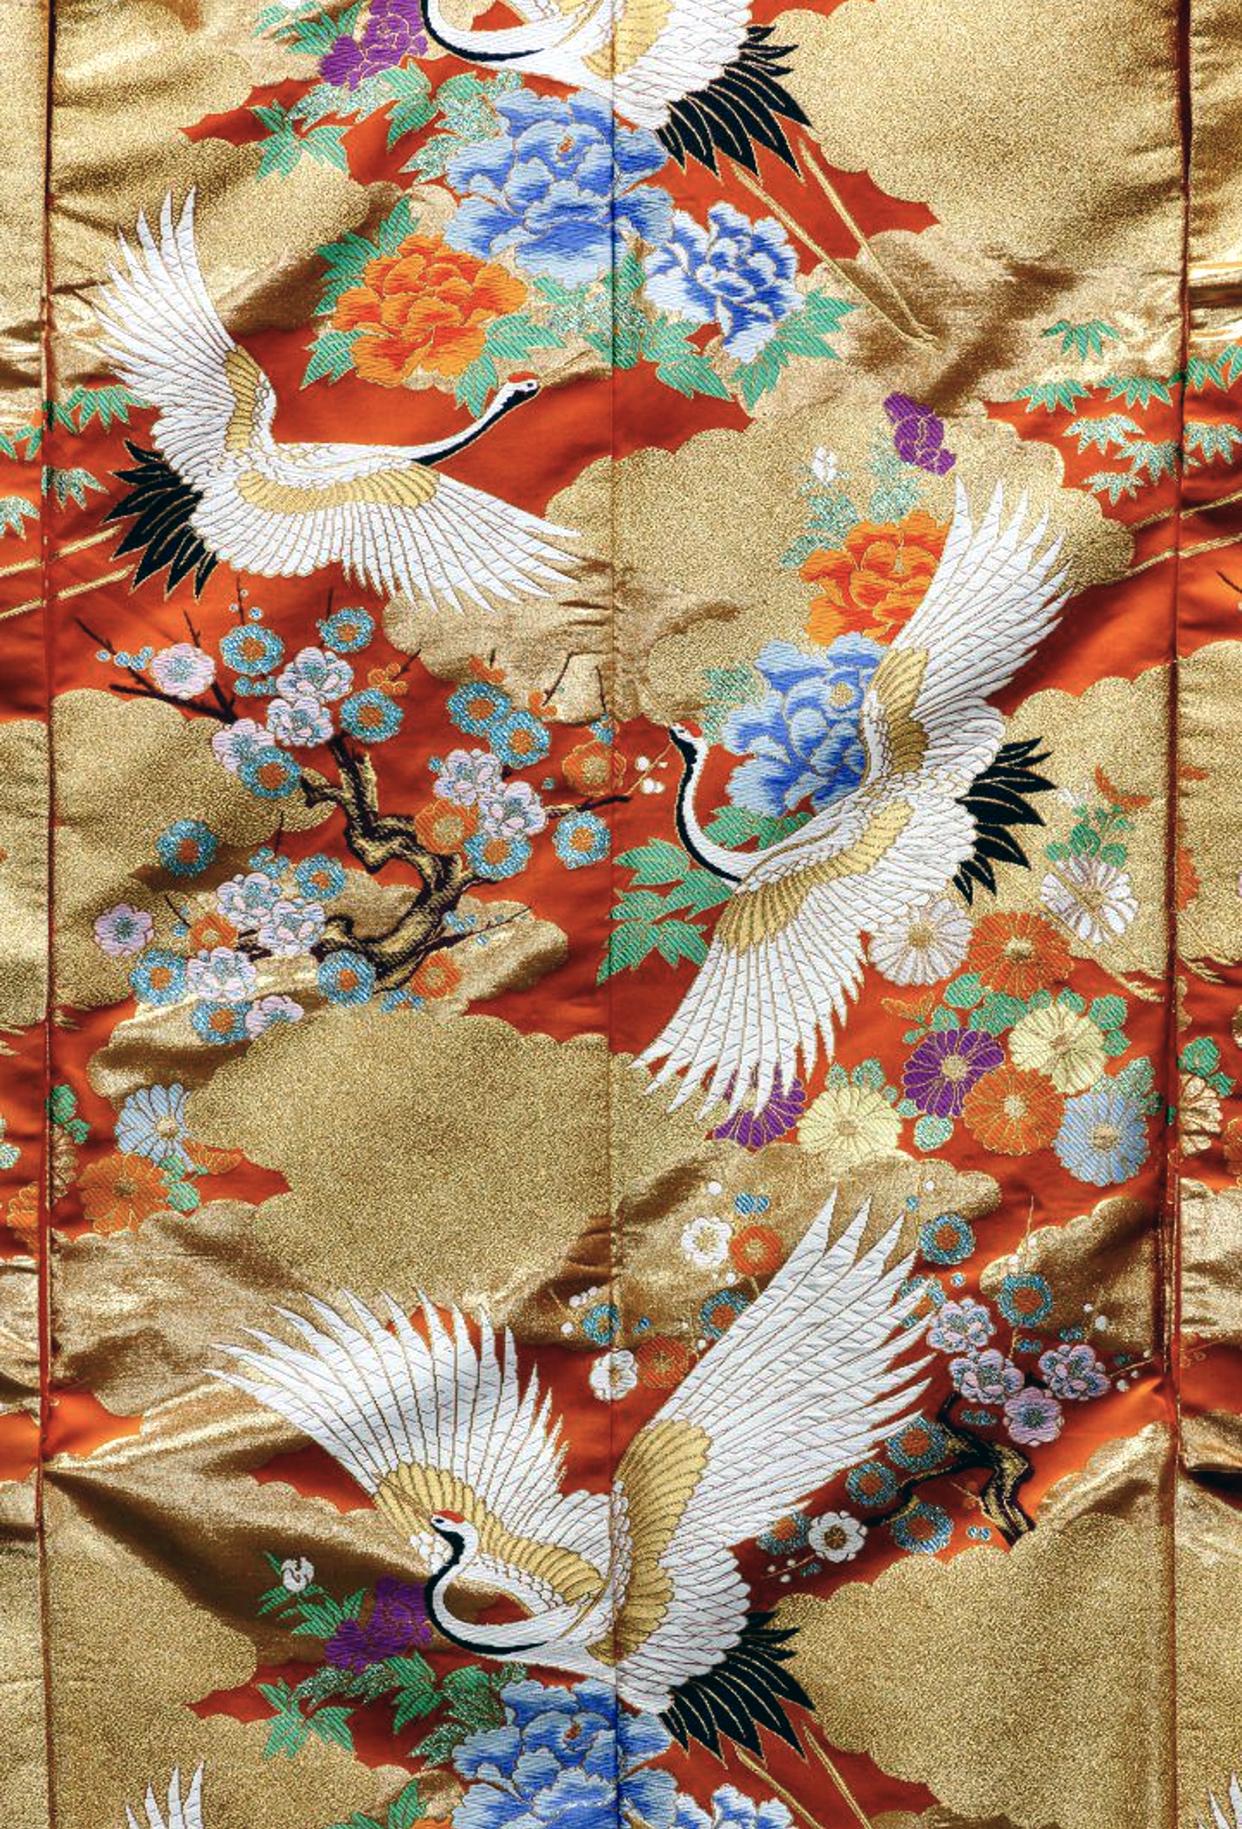 A large Japanese Wedding Kimono nicely framed with linen backing. The auspicious ceremonial attire was elaborated embroidered with flying cranes and blooming flowers such as peonies in various colors. The deep orange brocade background was further